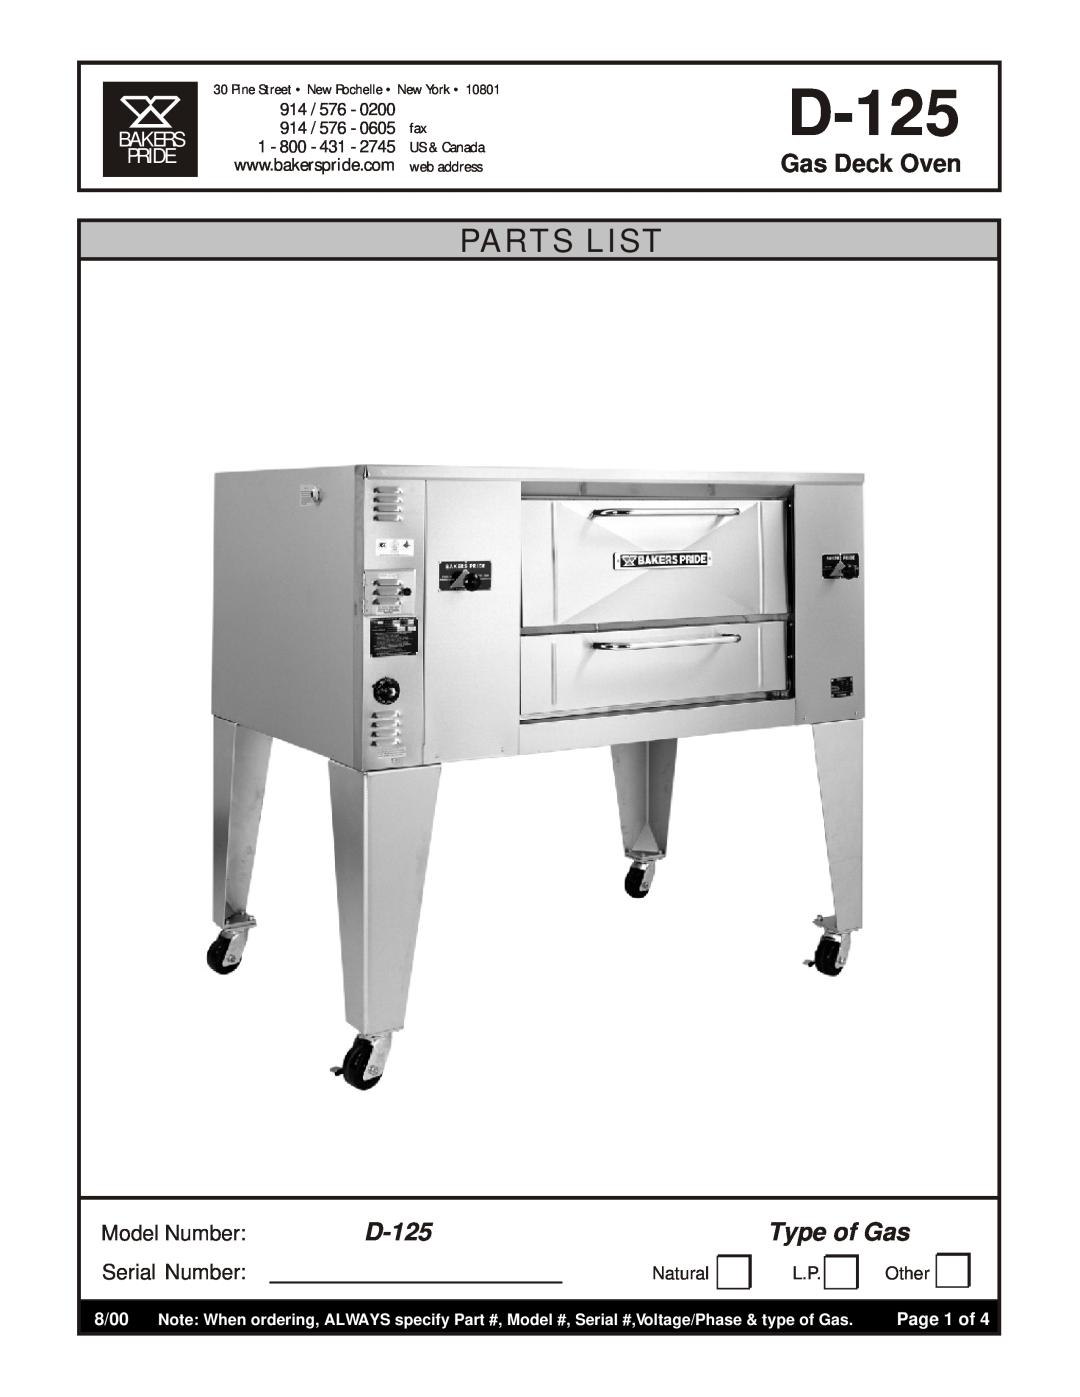 Bakers Pride Oven D-125 manual Parts List, Type of Gas, Gas Deck Oven, Model Number, Serial Number, 0200, 0605, 2745 